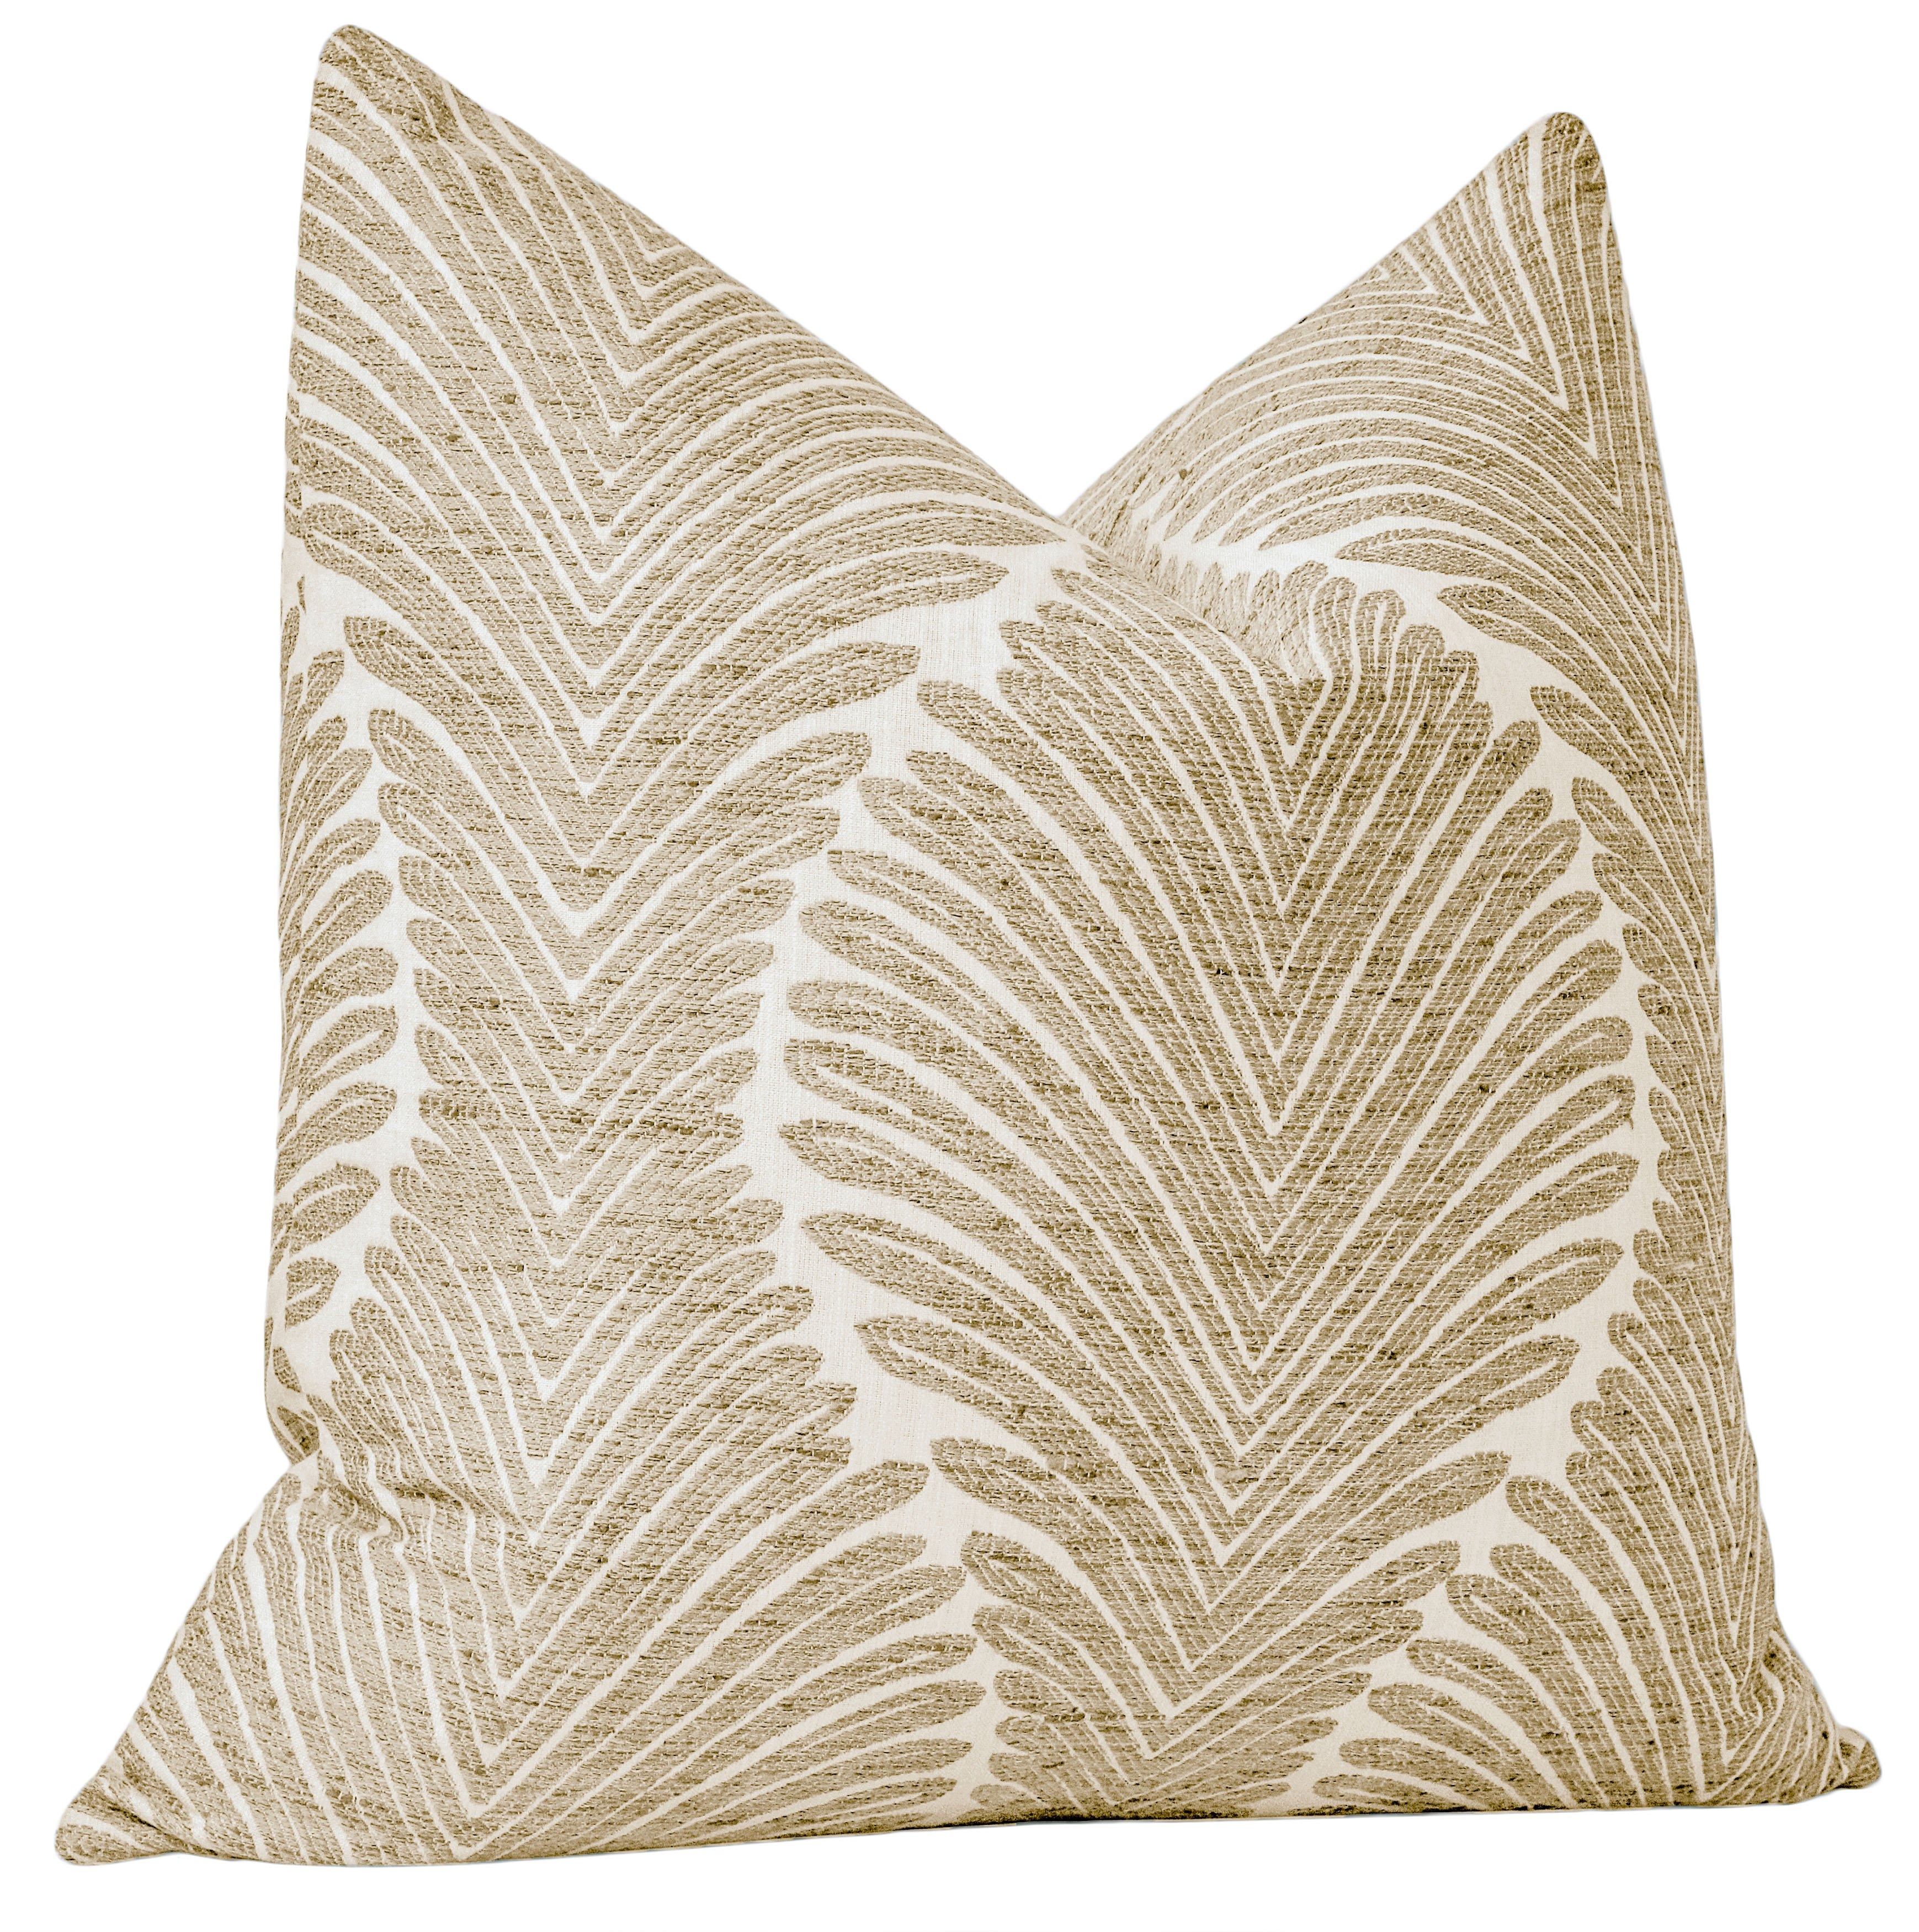 Musgrove Chenille Pillow Cover, Natural, 20" x 20" - Image 2